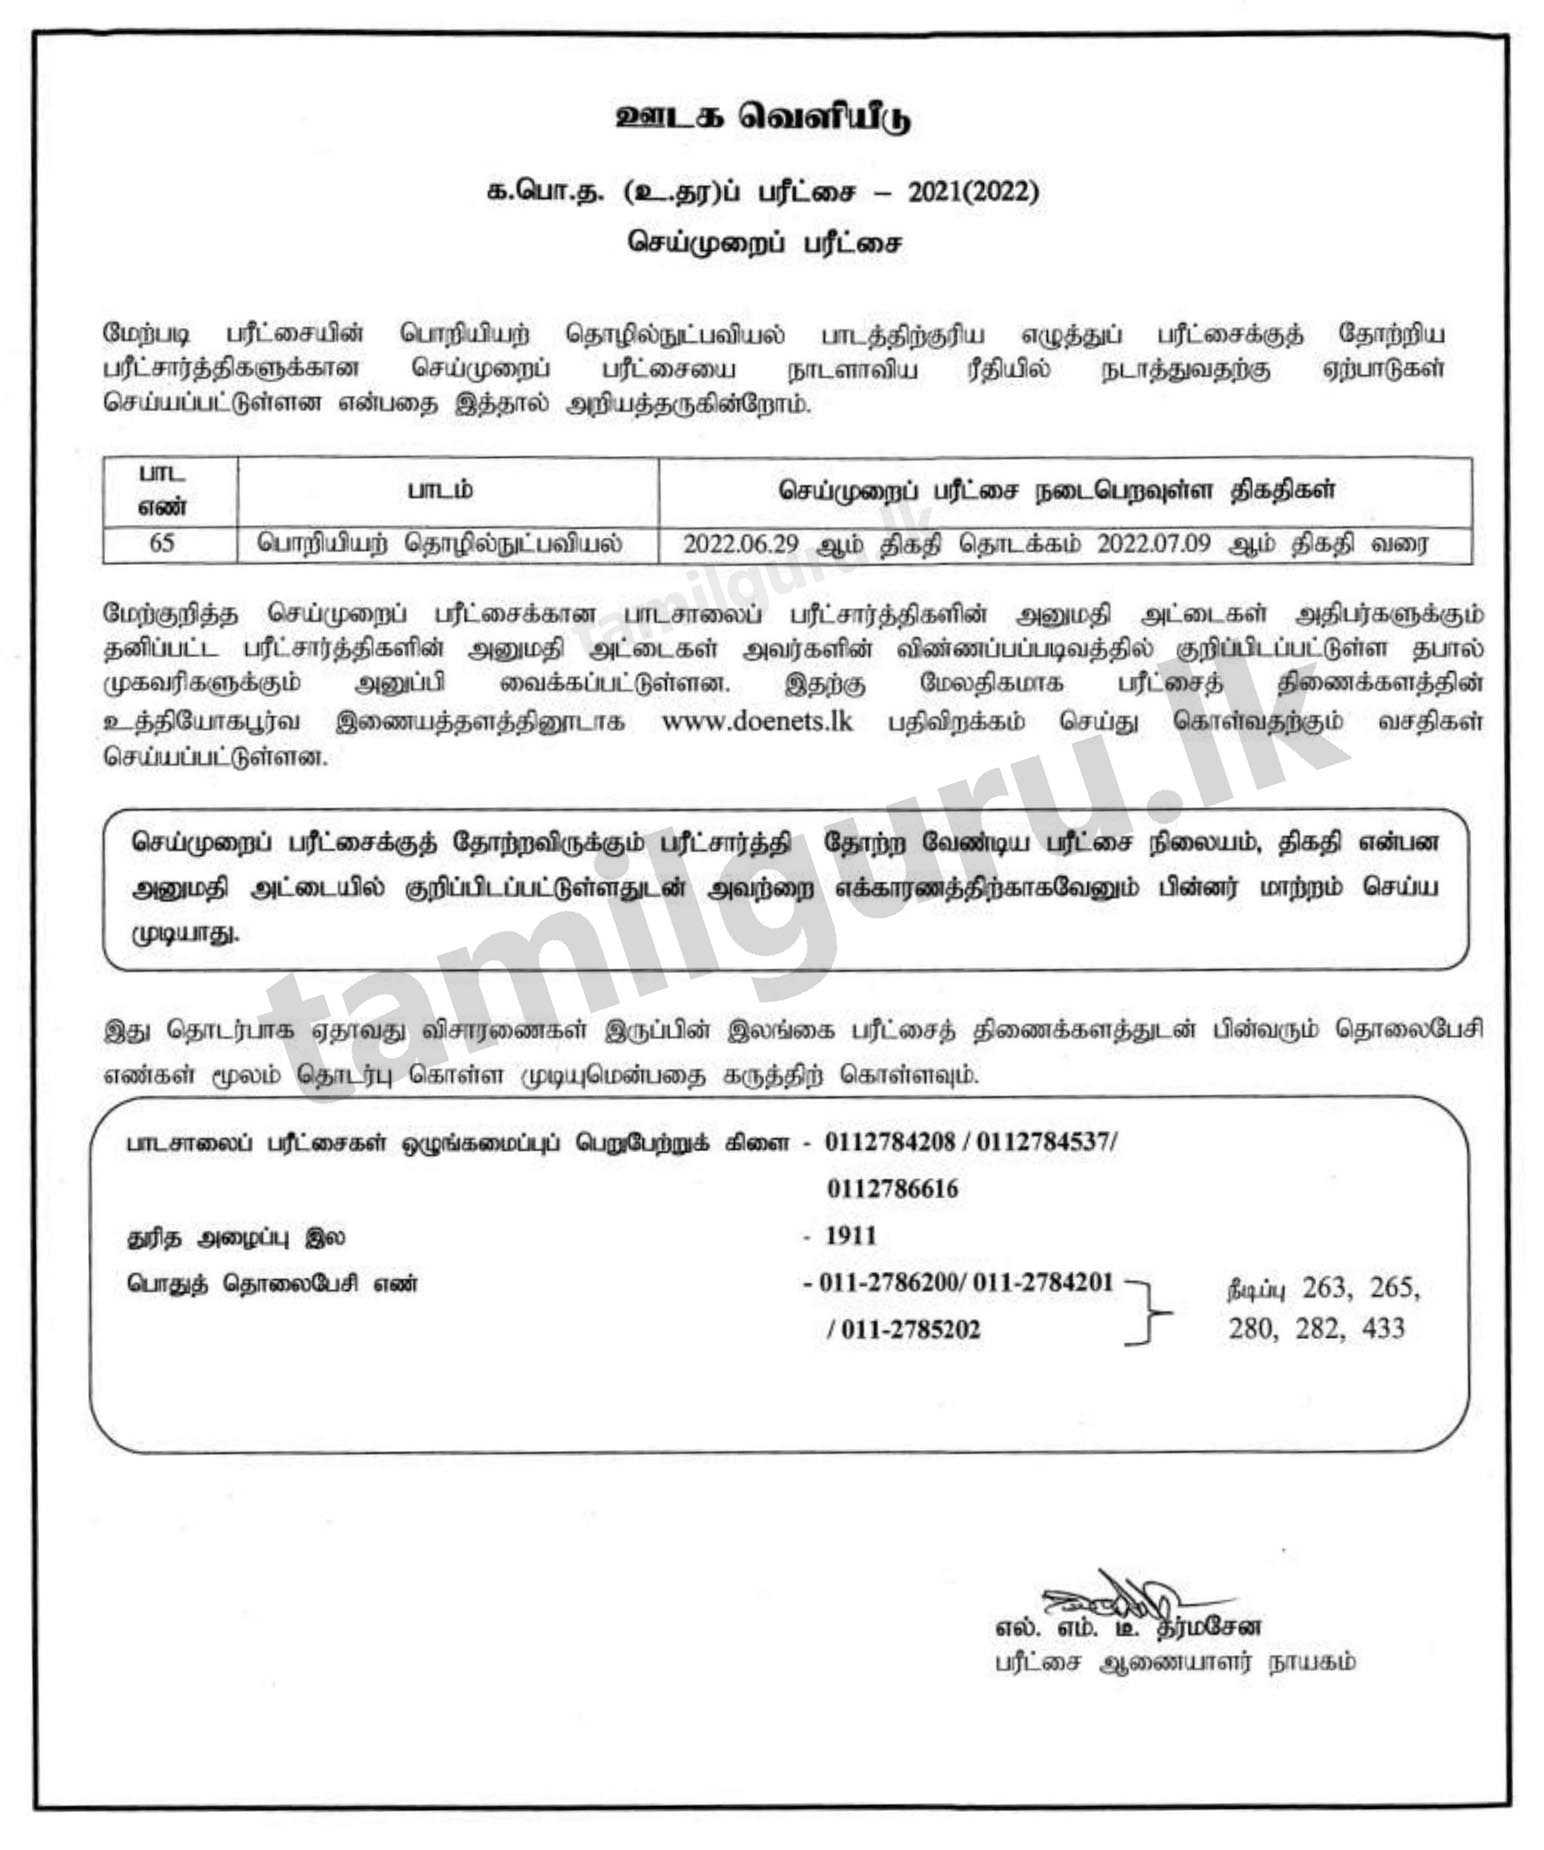 Practical Tests (Engineering Technology) - G.C.E. A/L Examination 2021 (2022) (Details in Tamil)